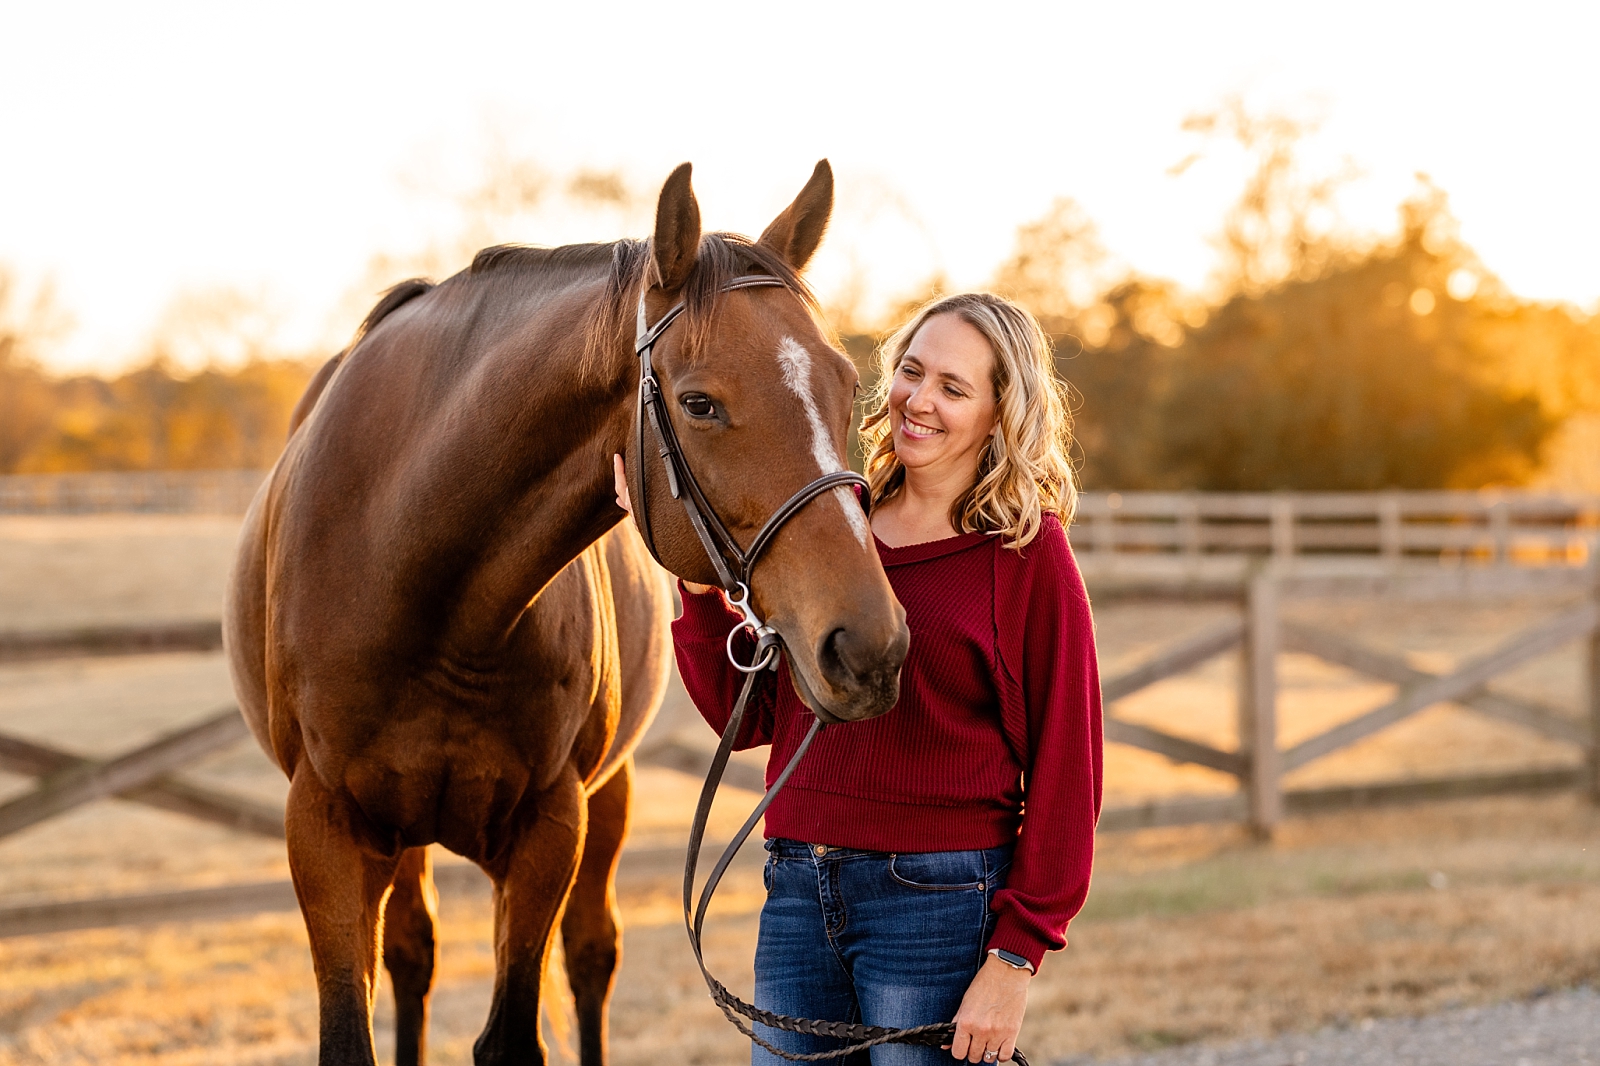 Family photos with horses. Equestrian family. Chattanooga horses. Equestrian boutique in Chattanooga, Heels Down Boutique.